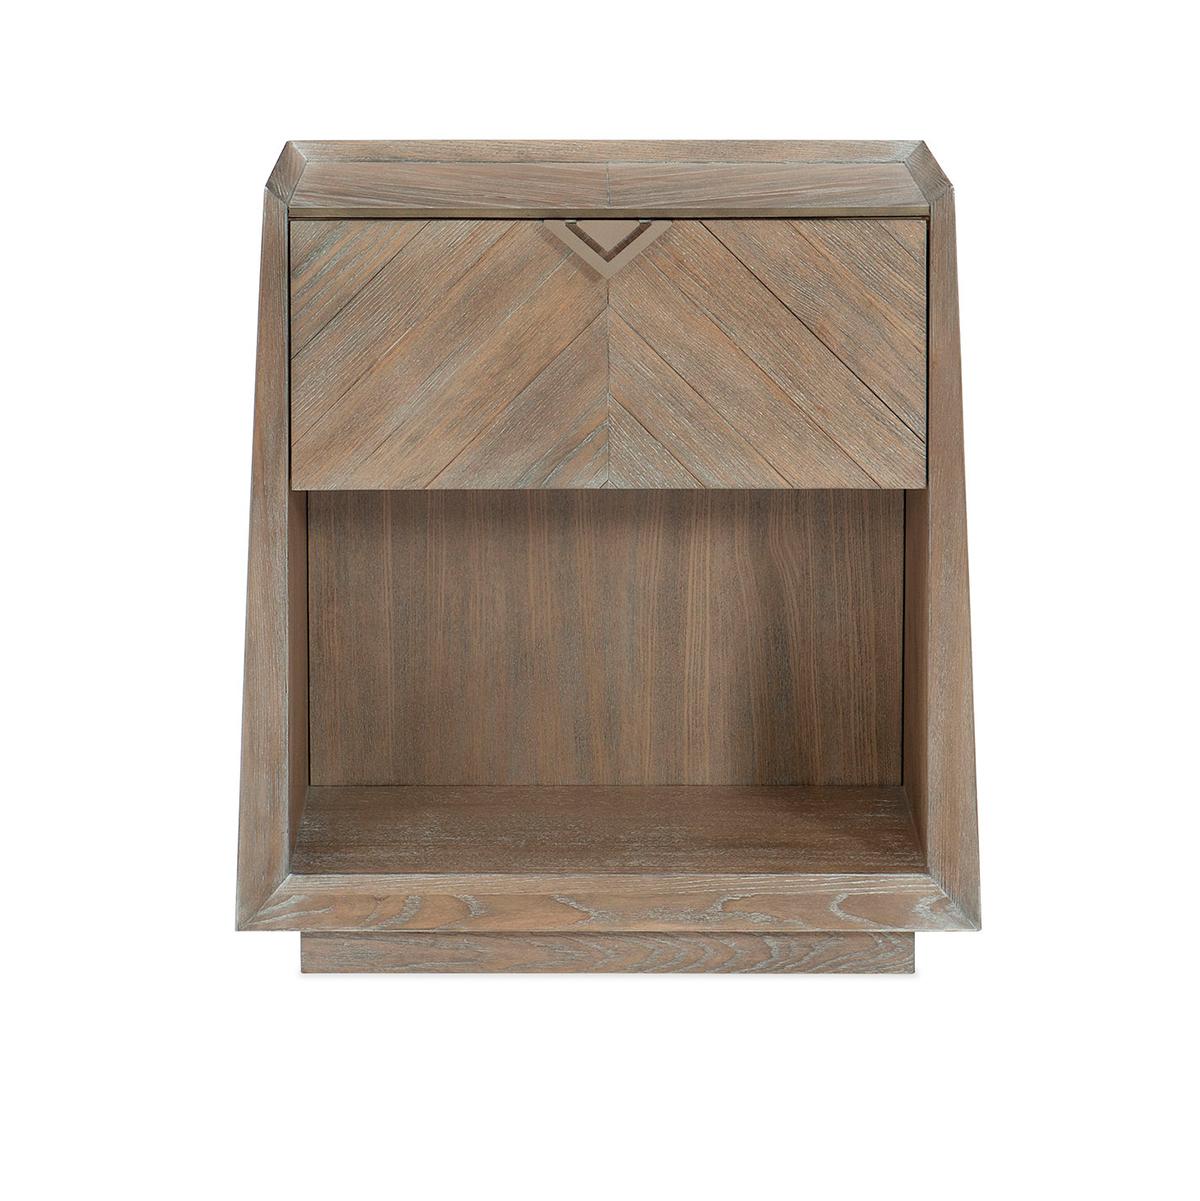 With a simple, slightly tapered silhouette brought to life with exquisitely matched directional woodgrain veneers in a one-of-a-kind chevron pattern.

A casual finish of Ash Driftwood highlights the beauty of its stunning veneers. This nightstand’s